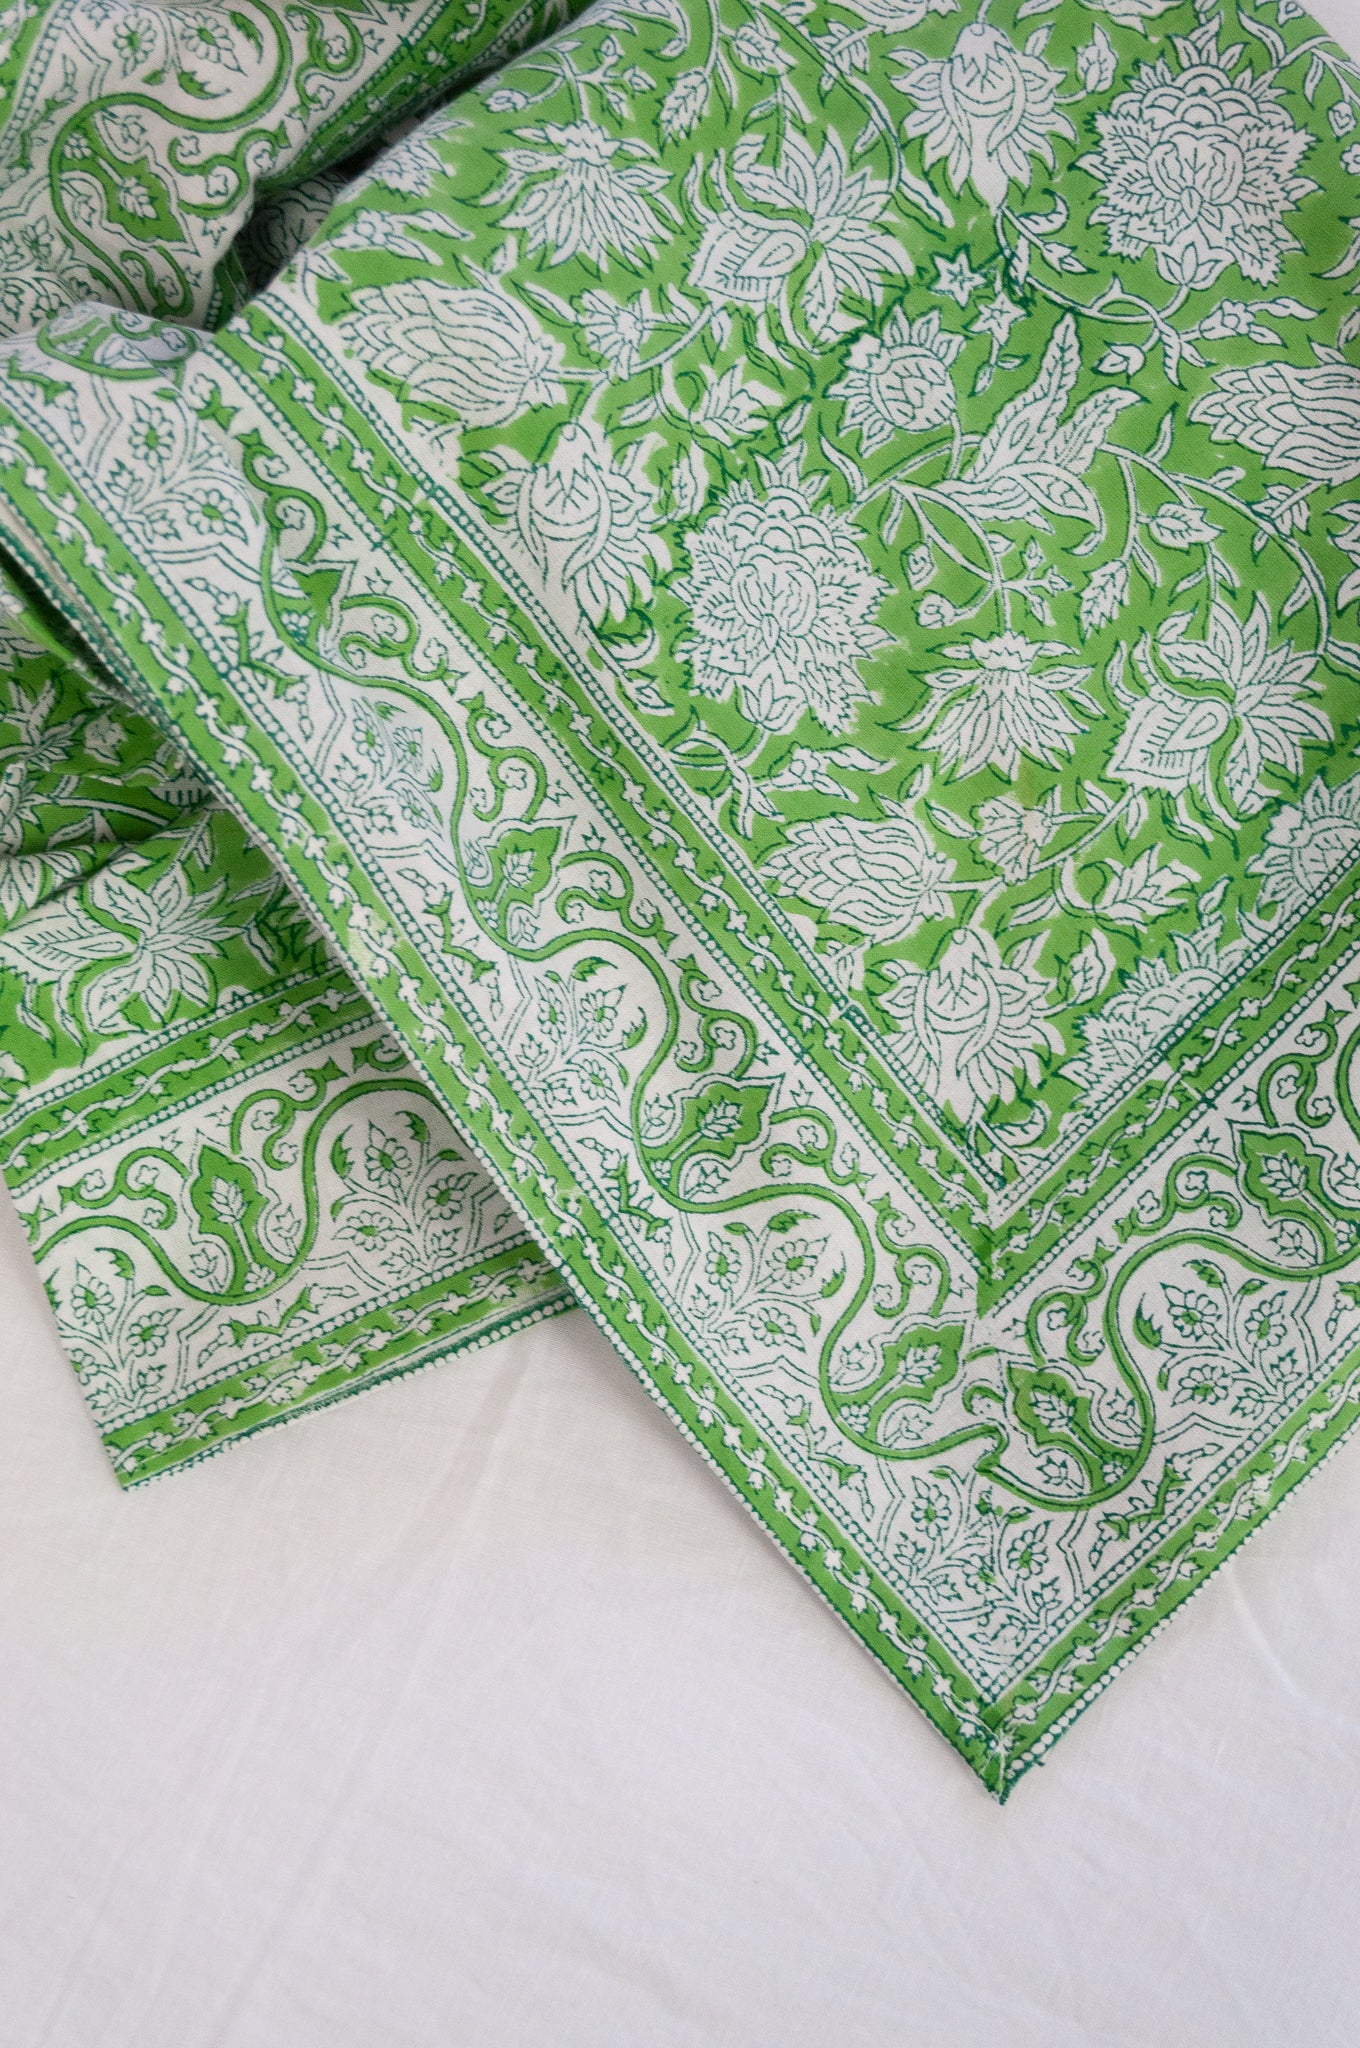 Blockprinted  cotton tablecloth in lime green and white floral design, made by hand.